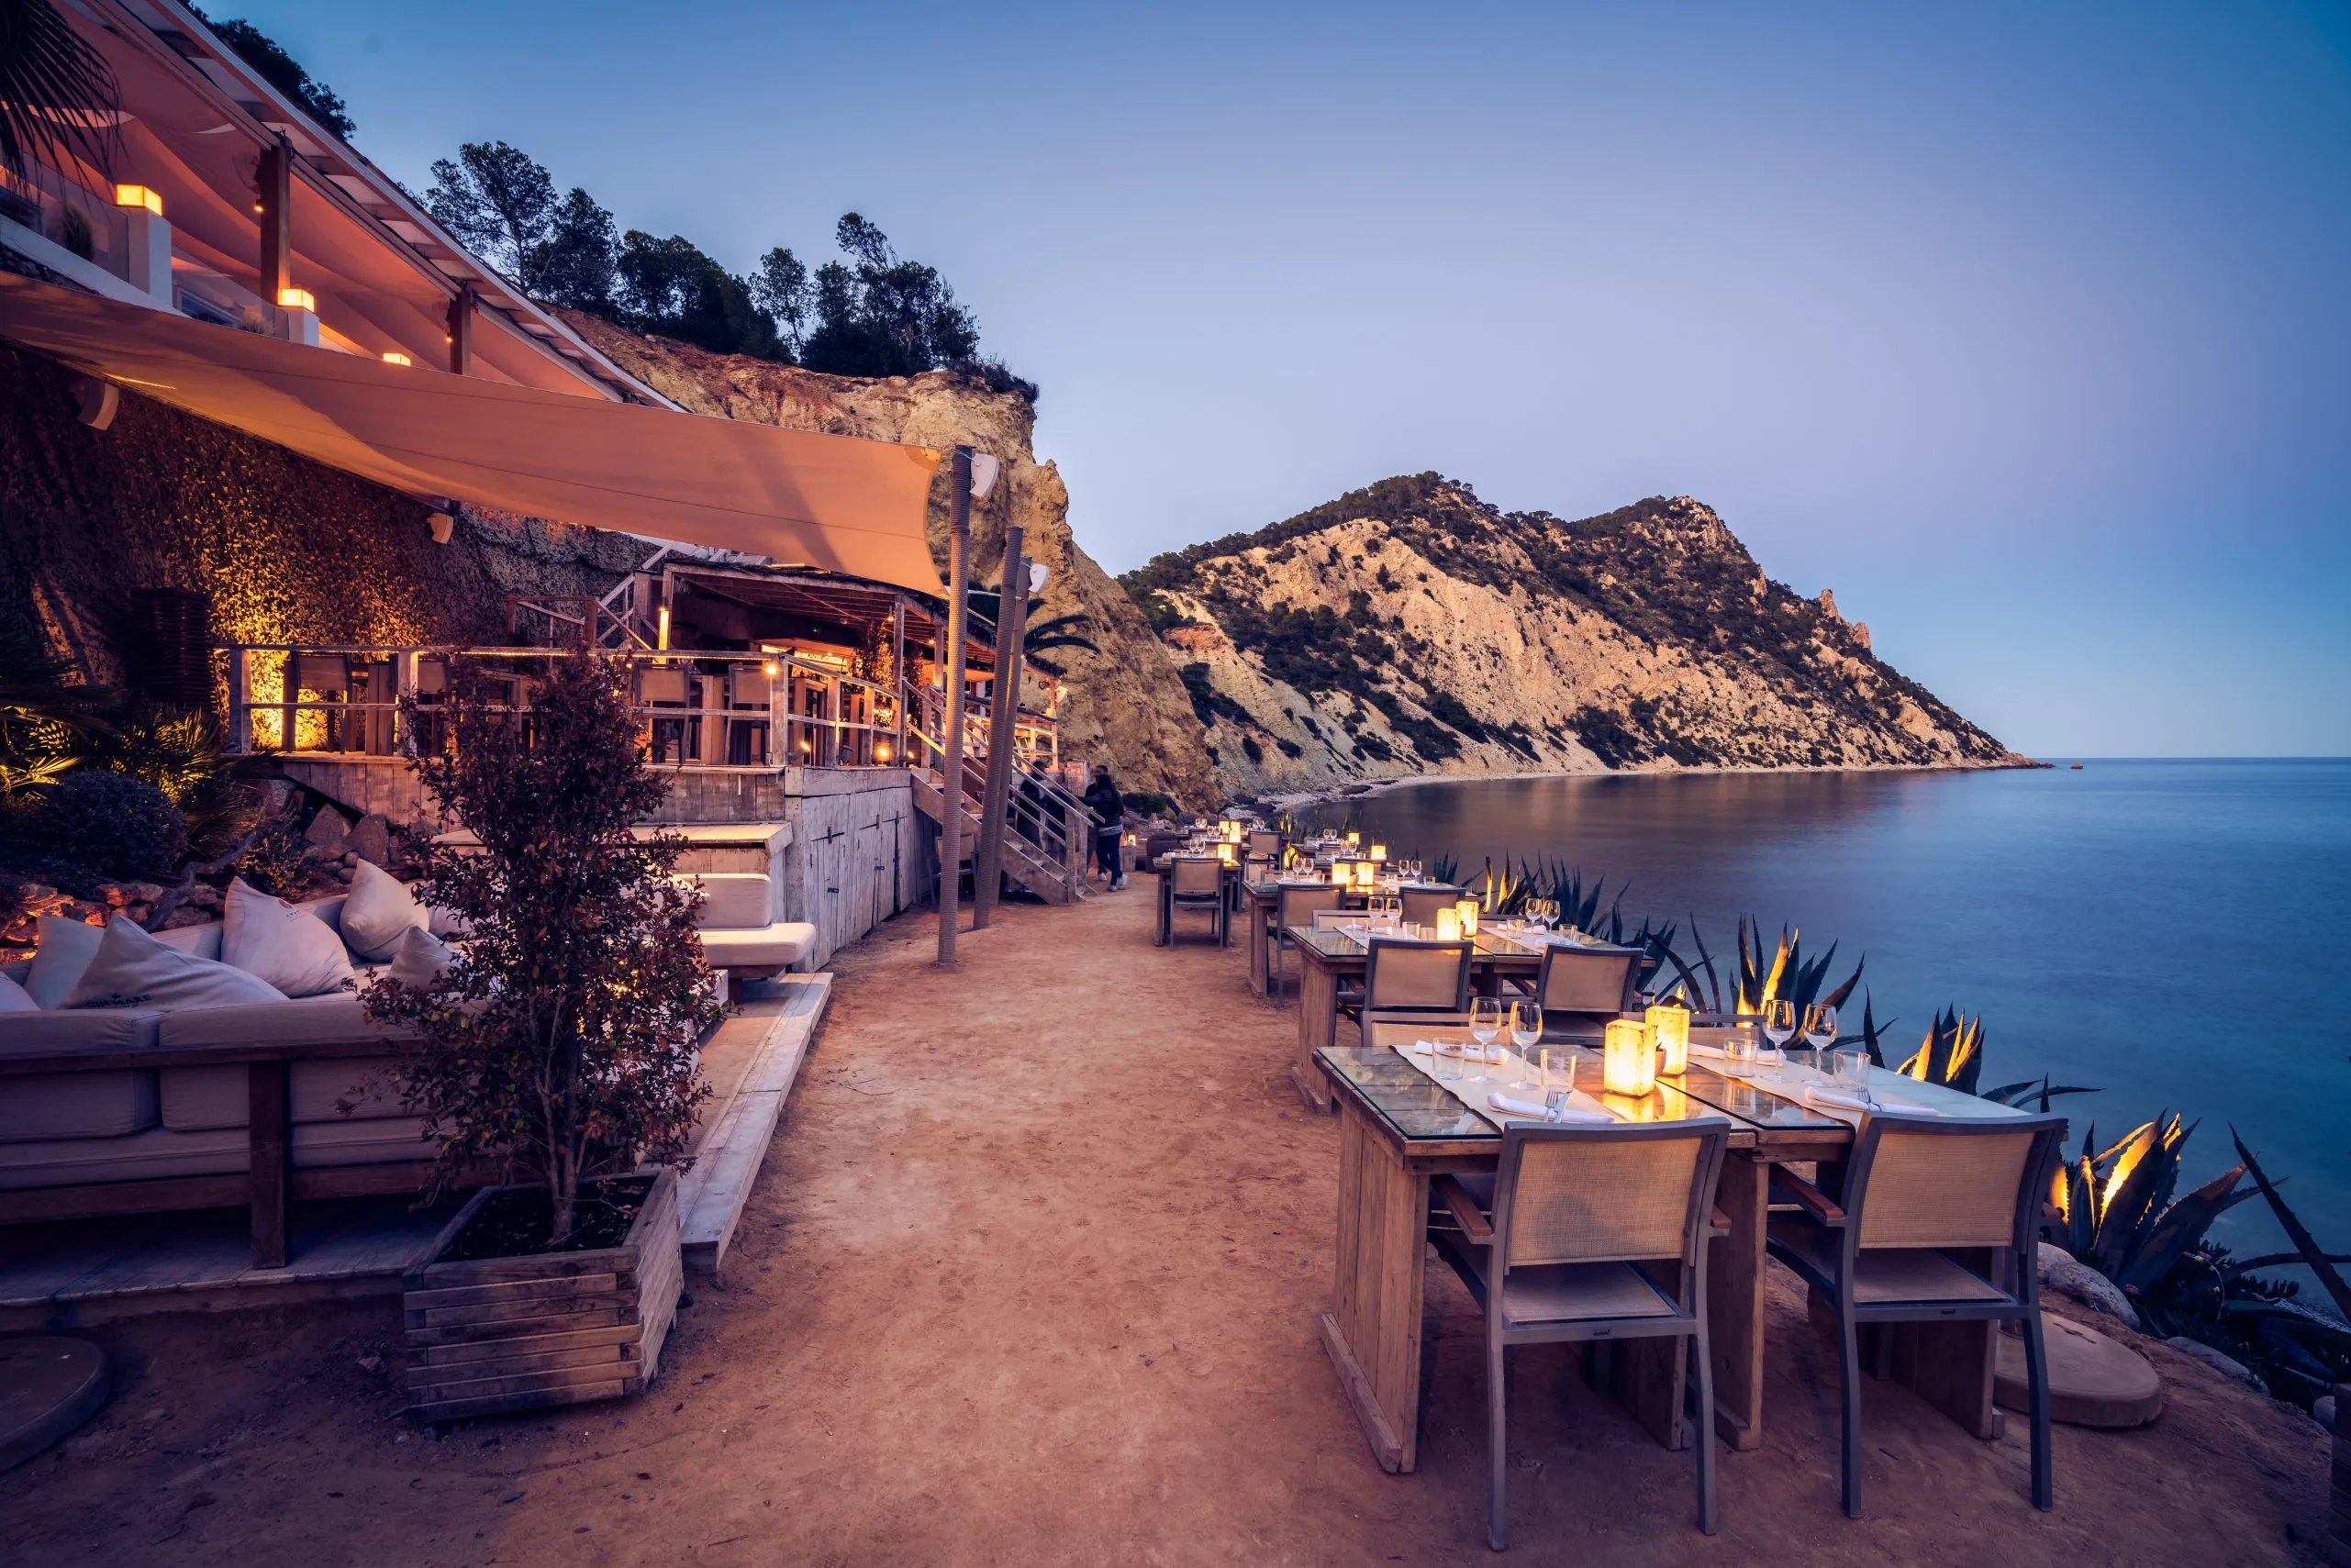 Amante Ibiza in Spain, Europe | Day and Beach Clubs,Restaurants - Rated 4.1